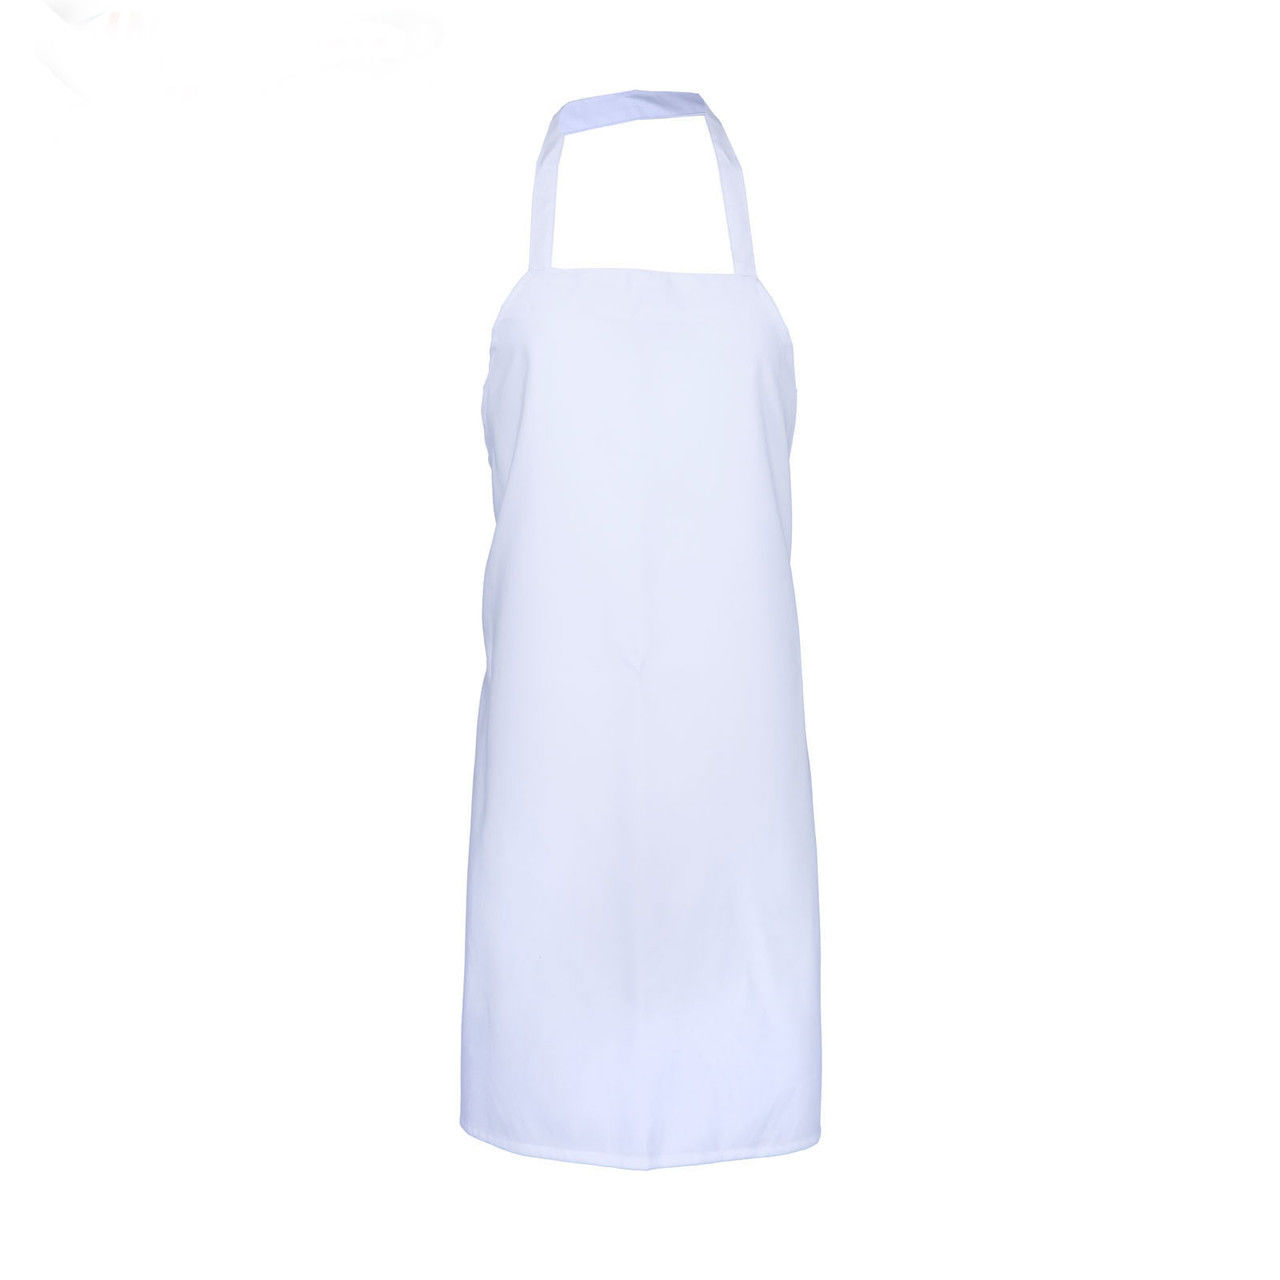 What fabric does Pinnacle Textiles use for the Basic Bib Apron?